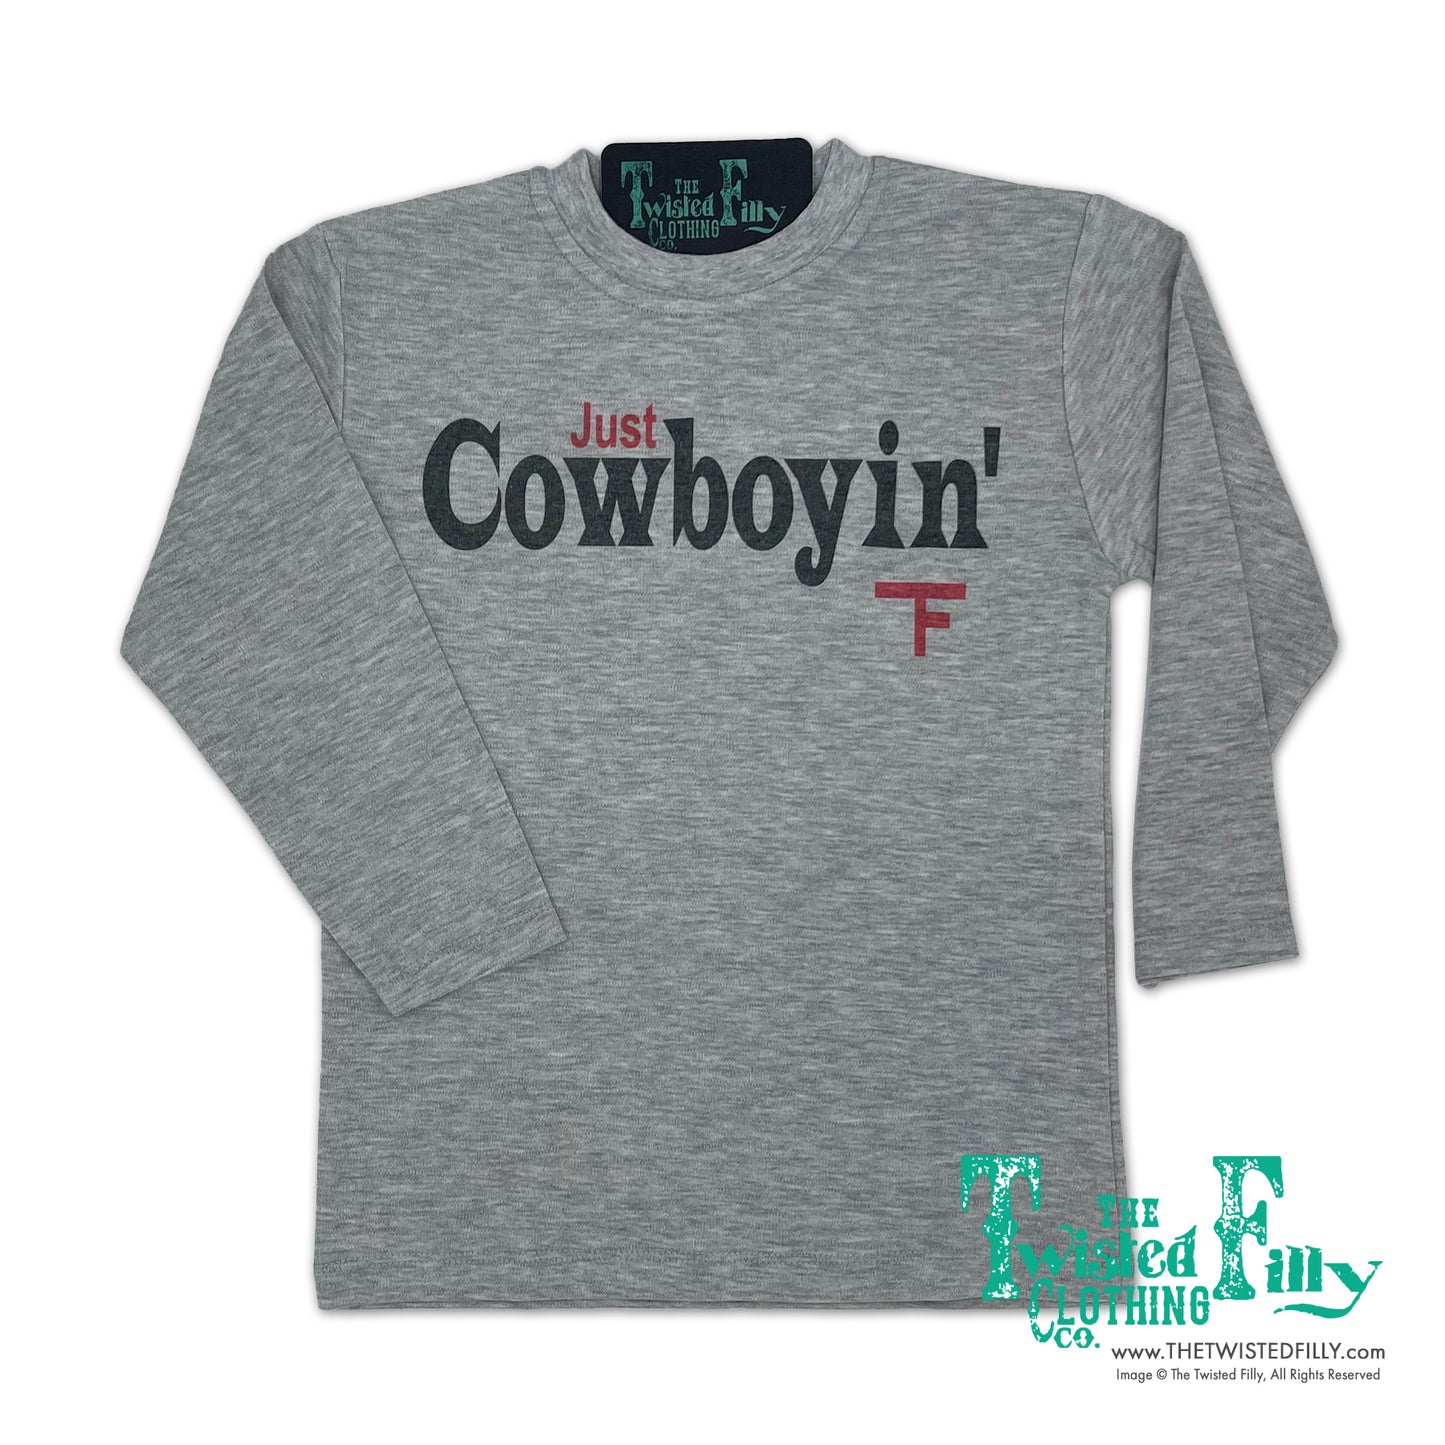 Just Cowboyin' - L/S Toddler Tee - Assorted Colors